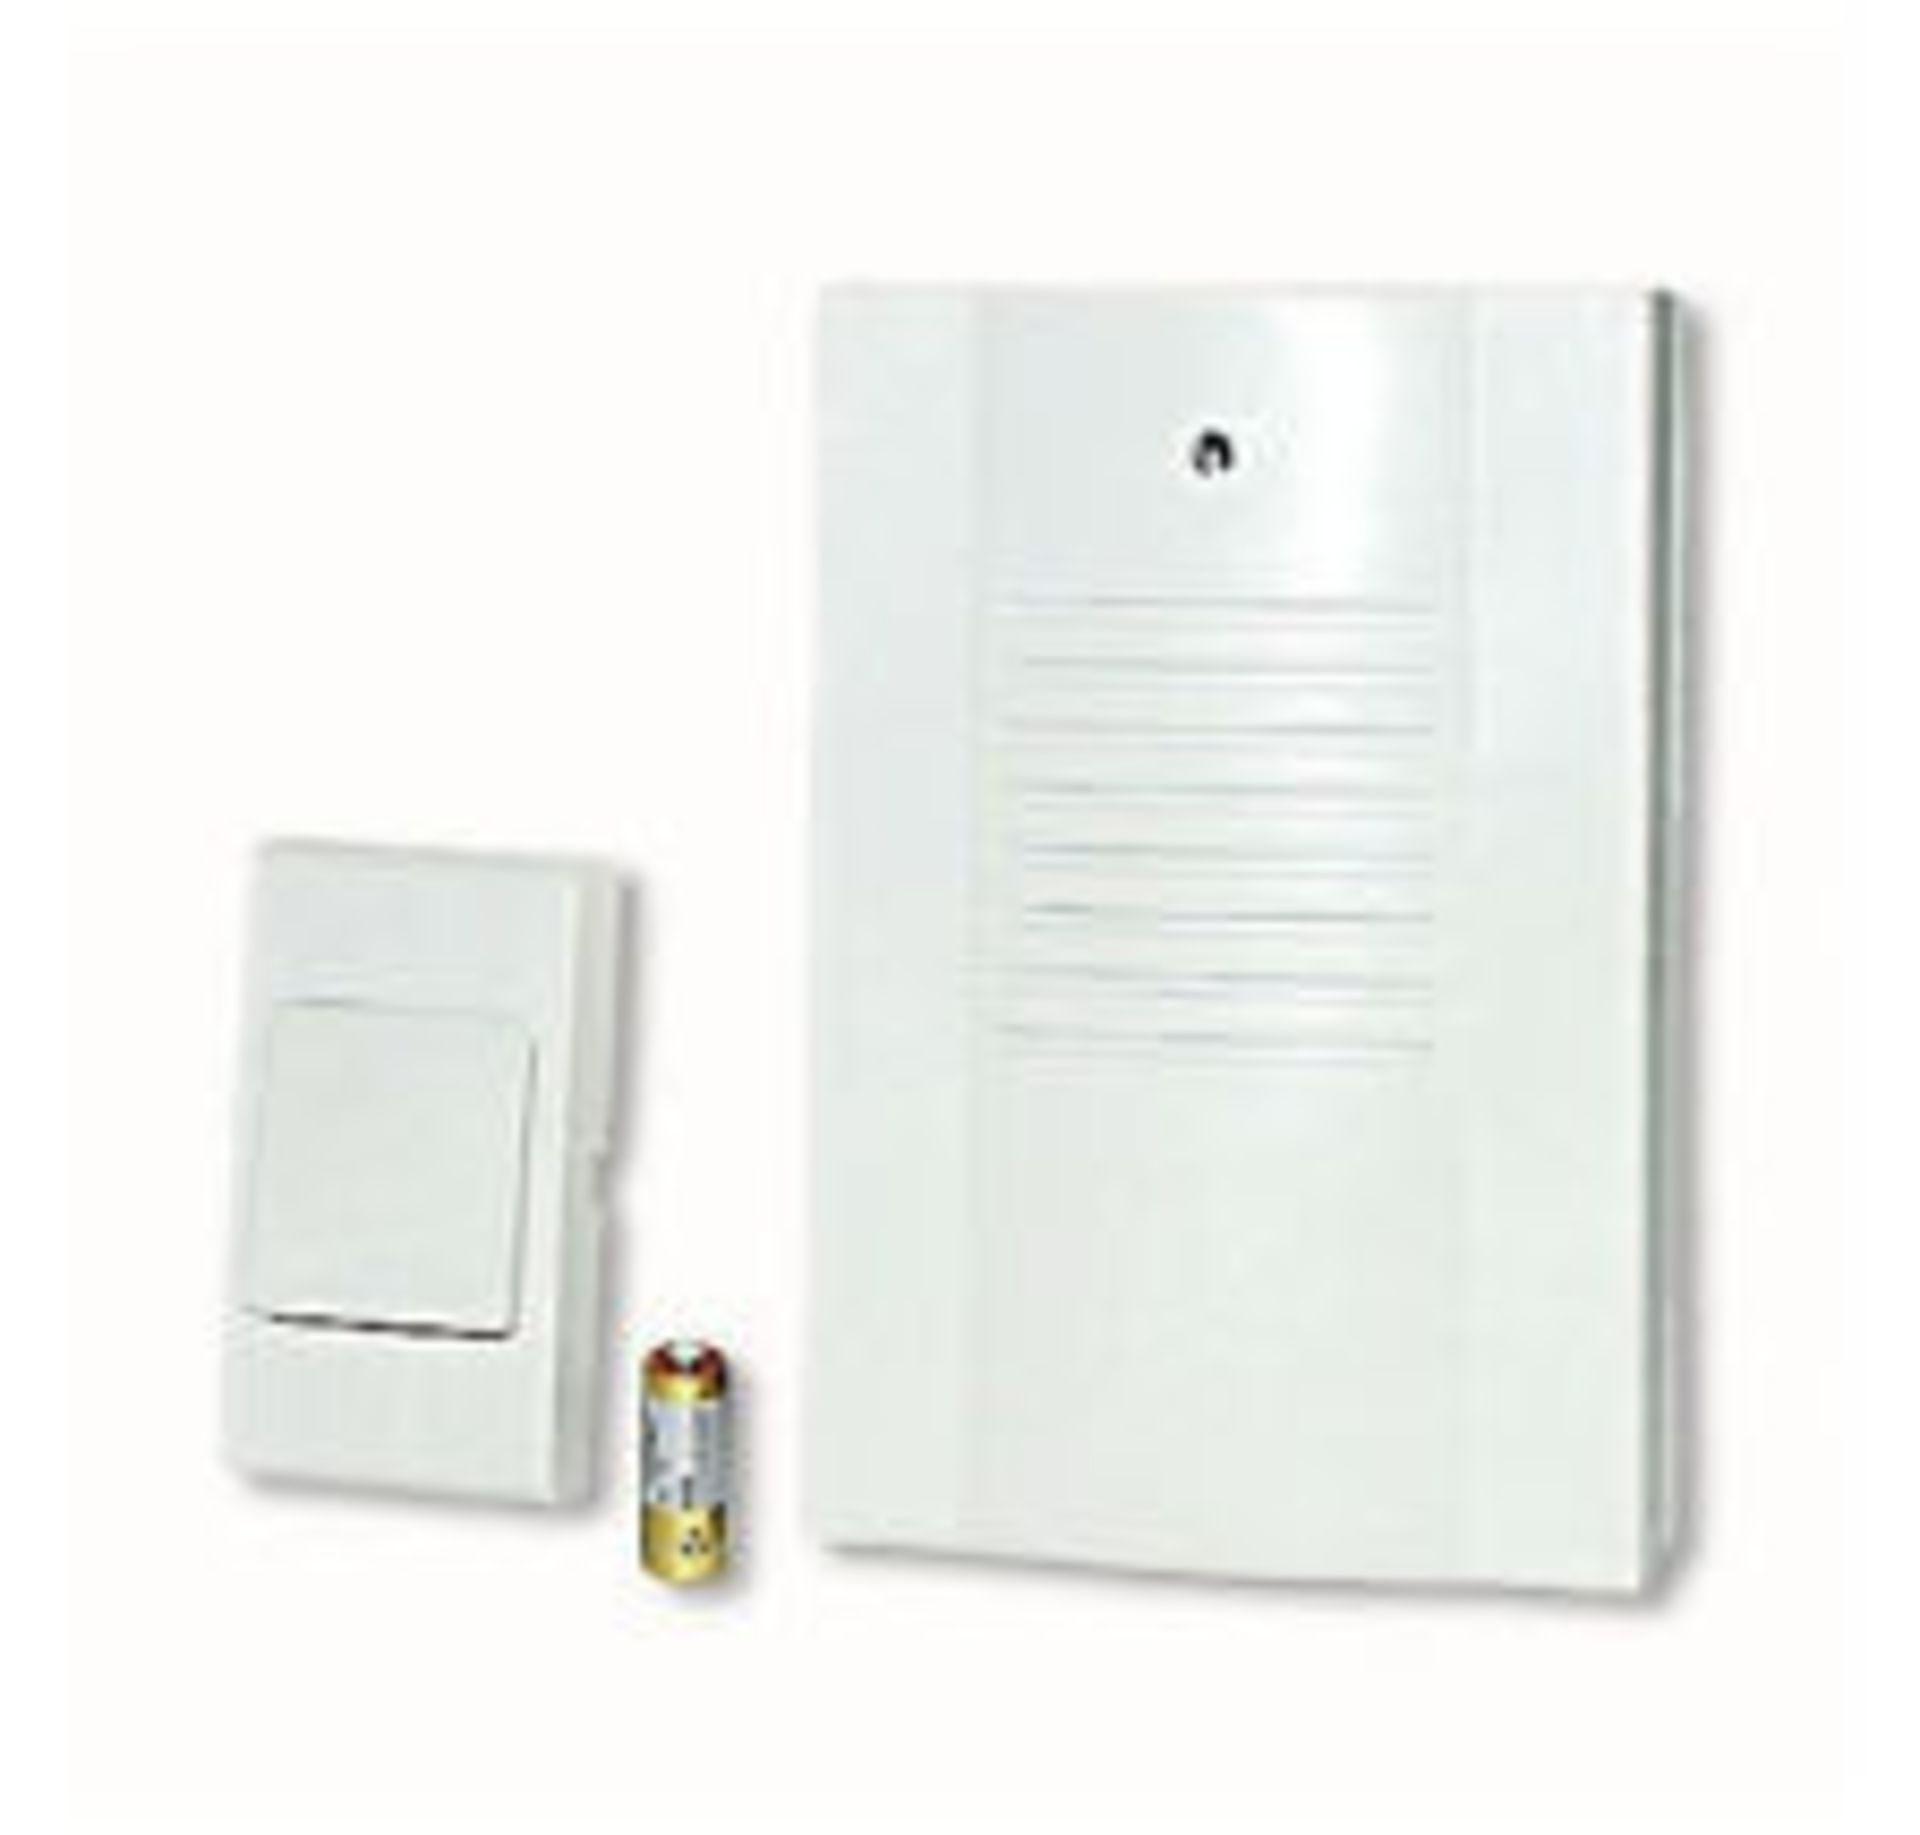 V *TRADE QTY* Brand New Wireless Doorbell With 16 Different Melodies And Up To 30 Metre Range X 5